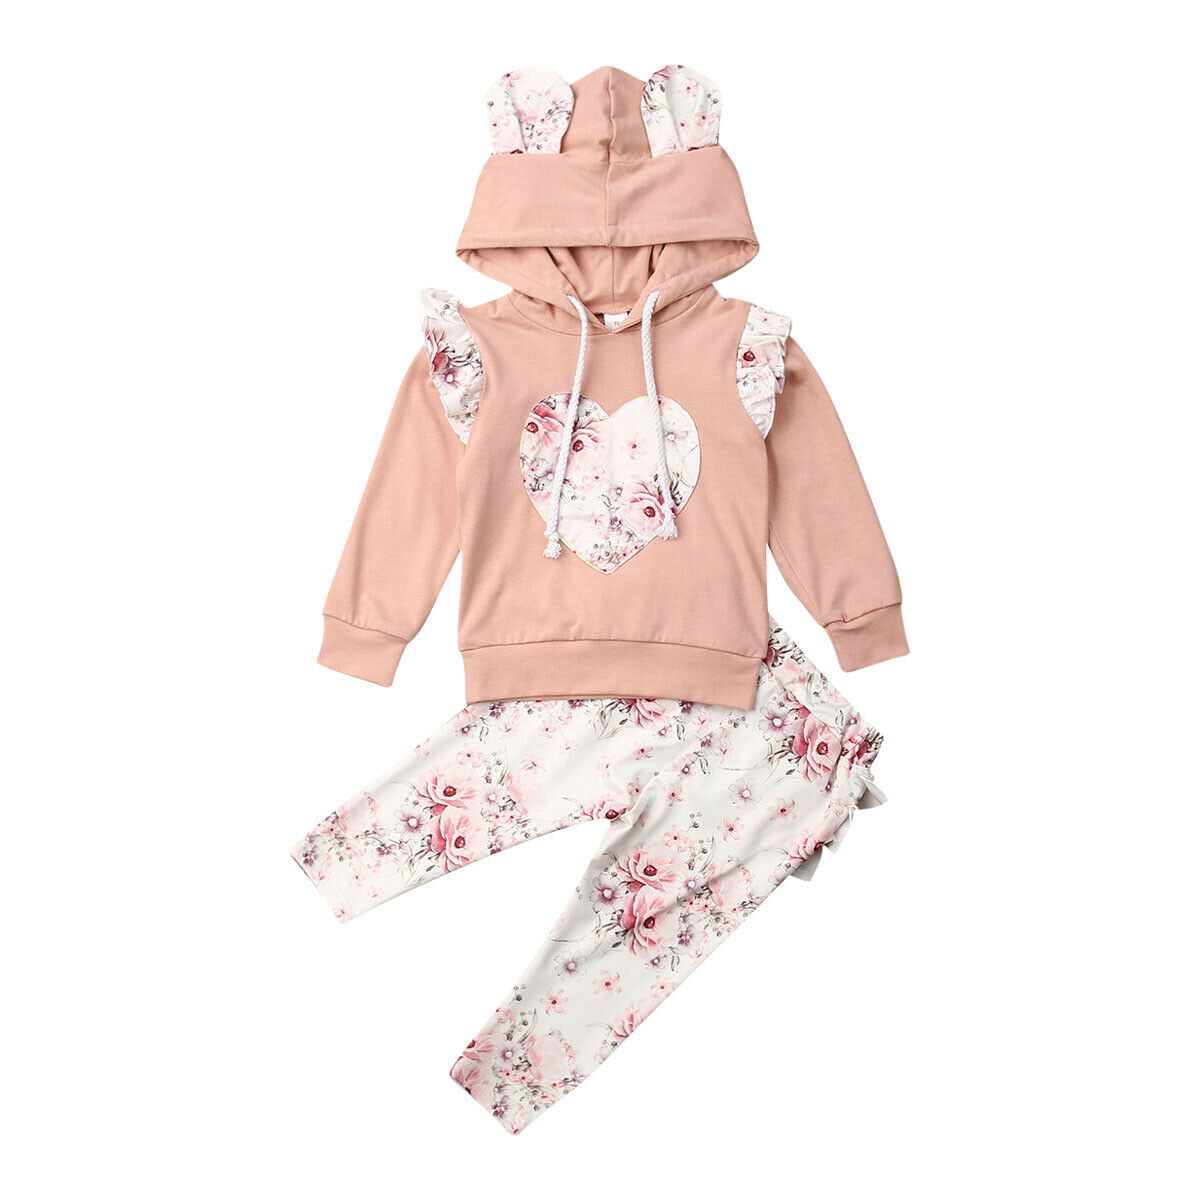 Vinjeely Infant Baby Girls Set Floral Rose Print Hoodie Tops+Pants Outfits Fall Winter Clothes 0-24M